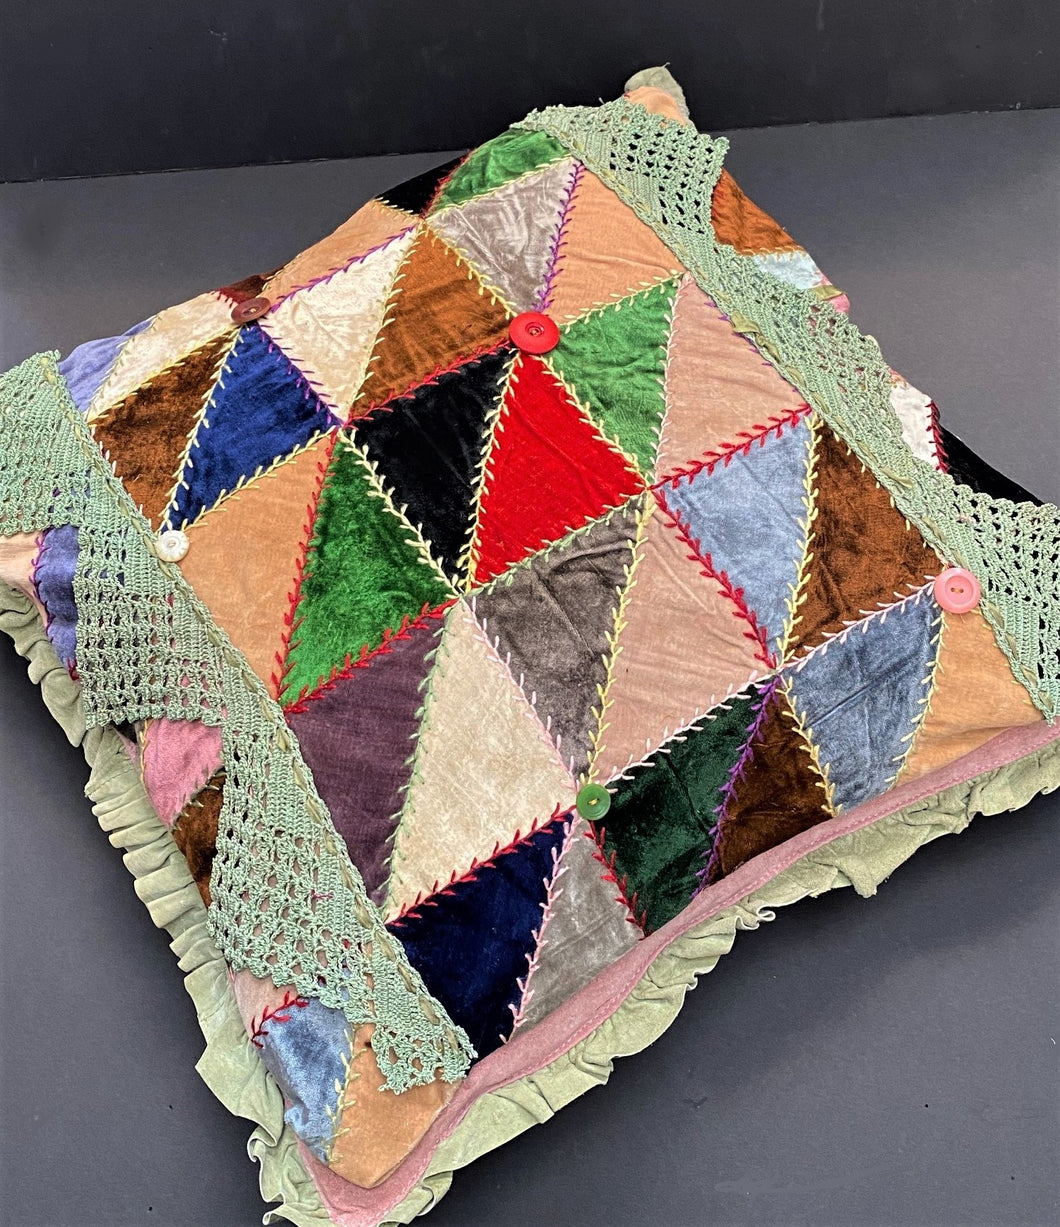 Upcycled harlequin patchwork pillow adorned with crochet, leather, lace, and buttons